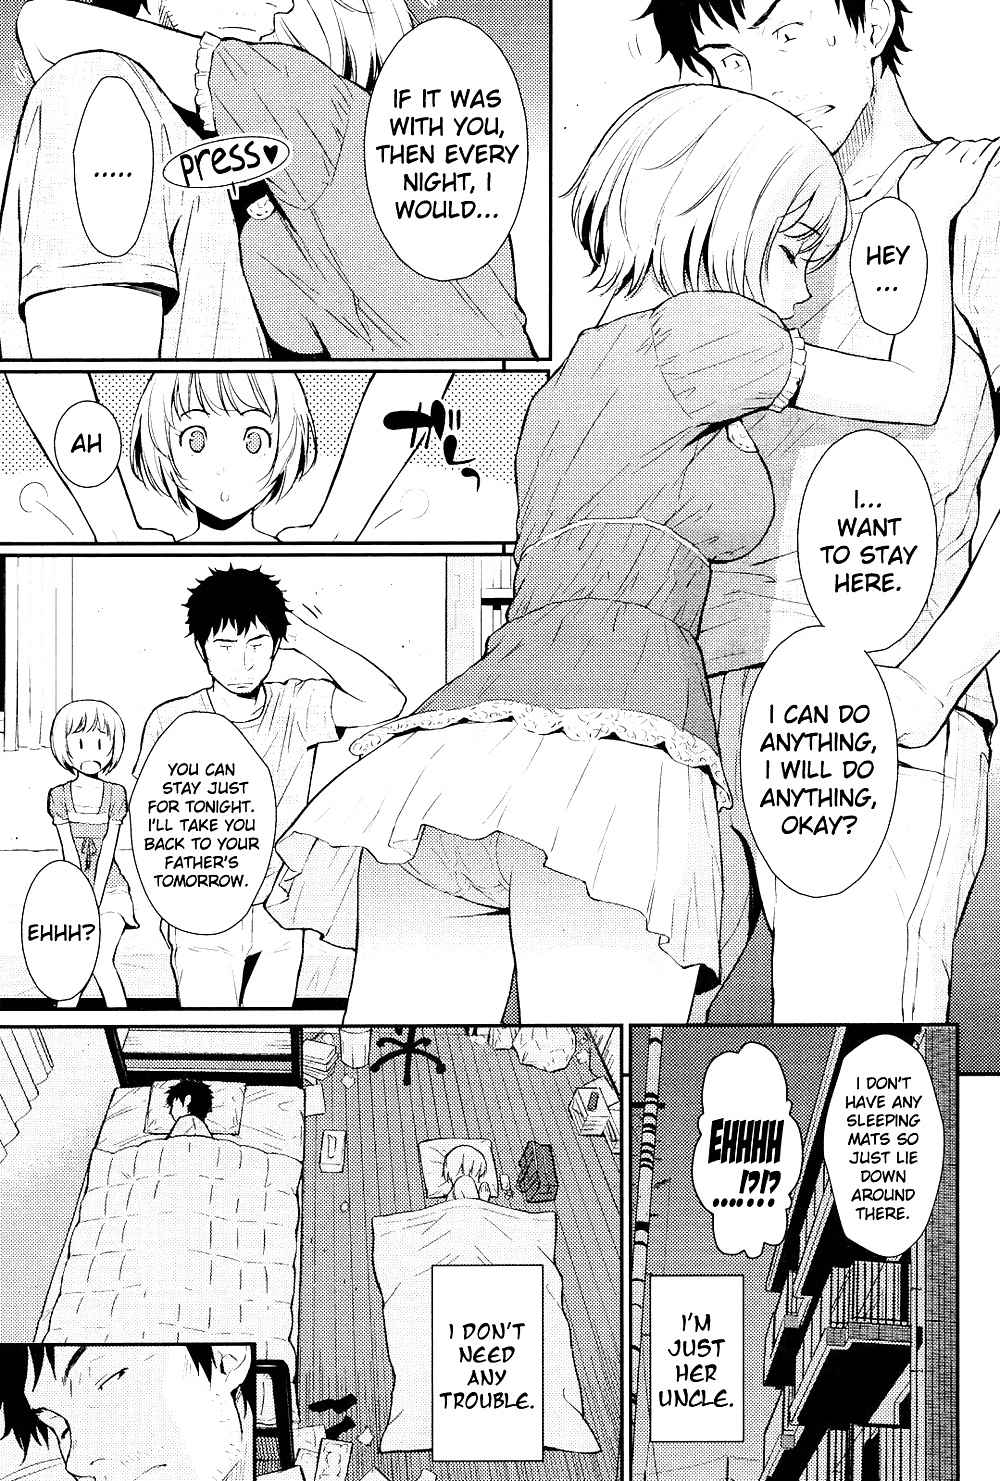 Spending Time with Uncle (Manga) #35464020